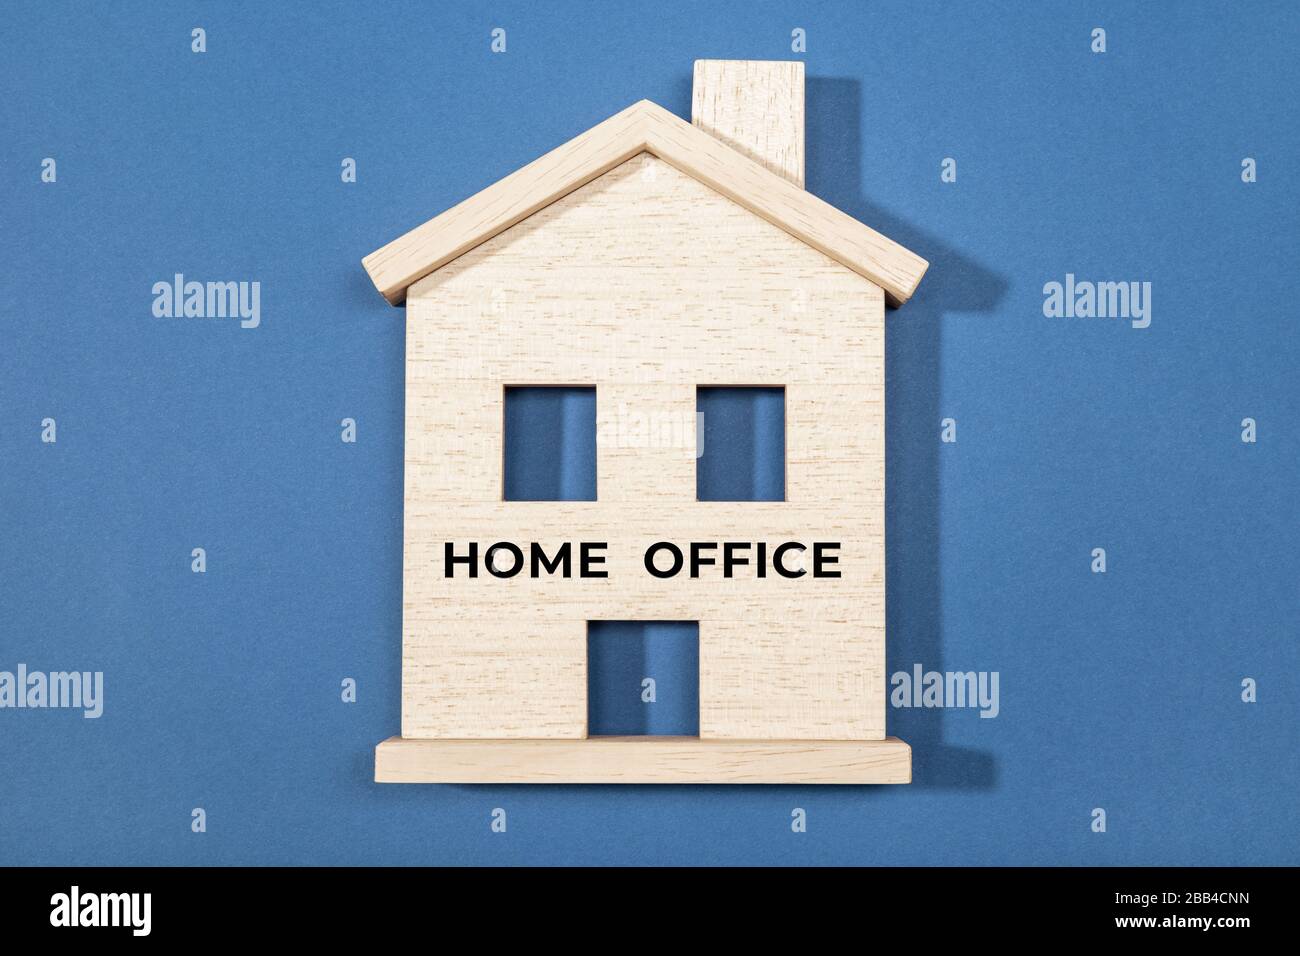 Home Office concept. Wooden house icon isolated on blue background Stock Photo